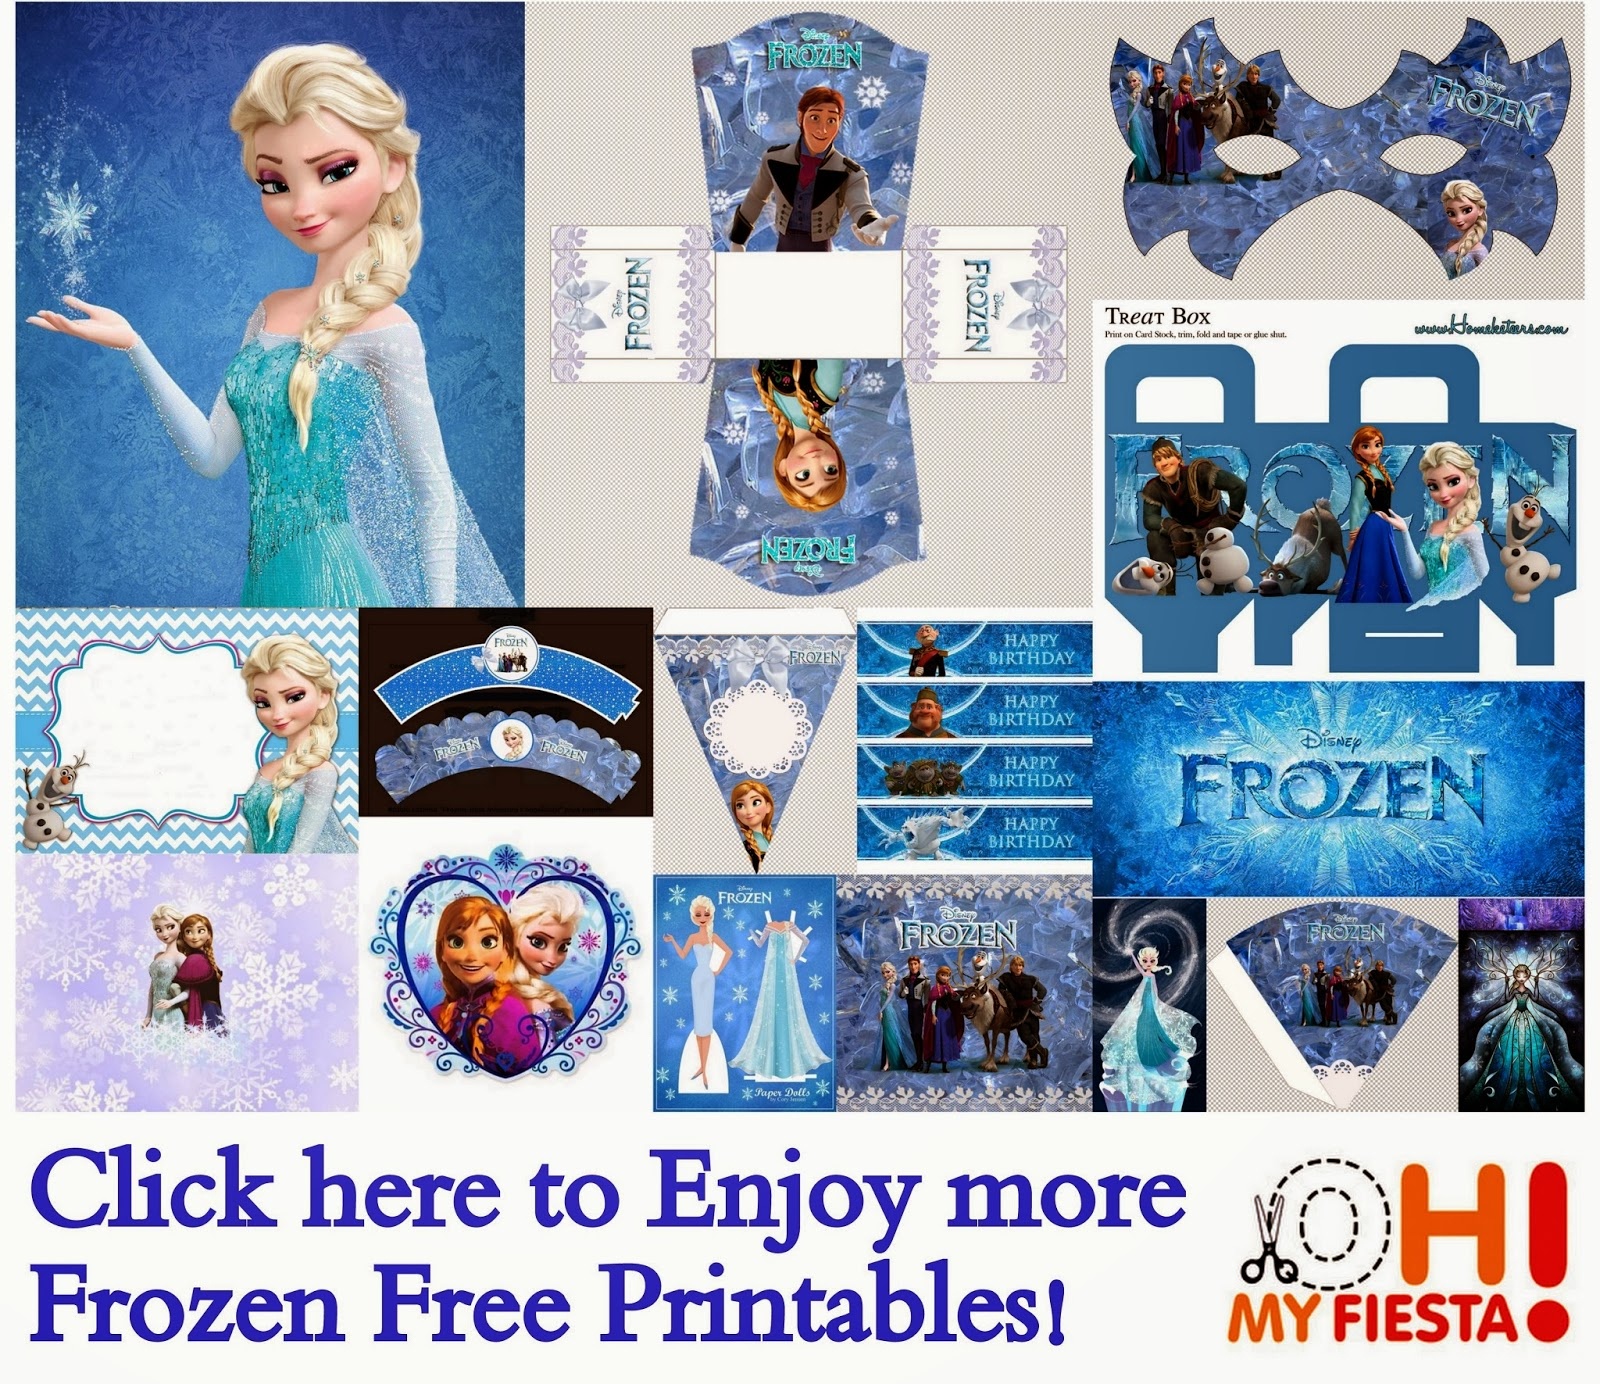 Frozen Party: Free Printables. - Oh My Fiesta! In English - Frozen Happy Birthday Banner Free Printable